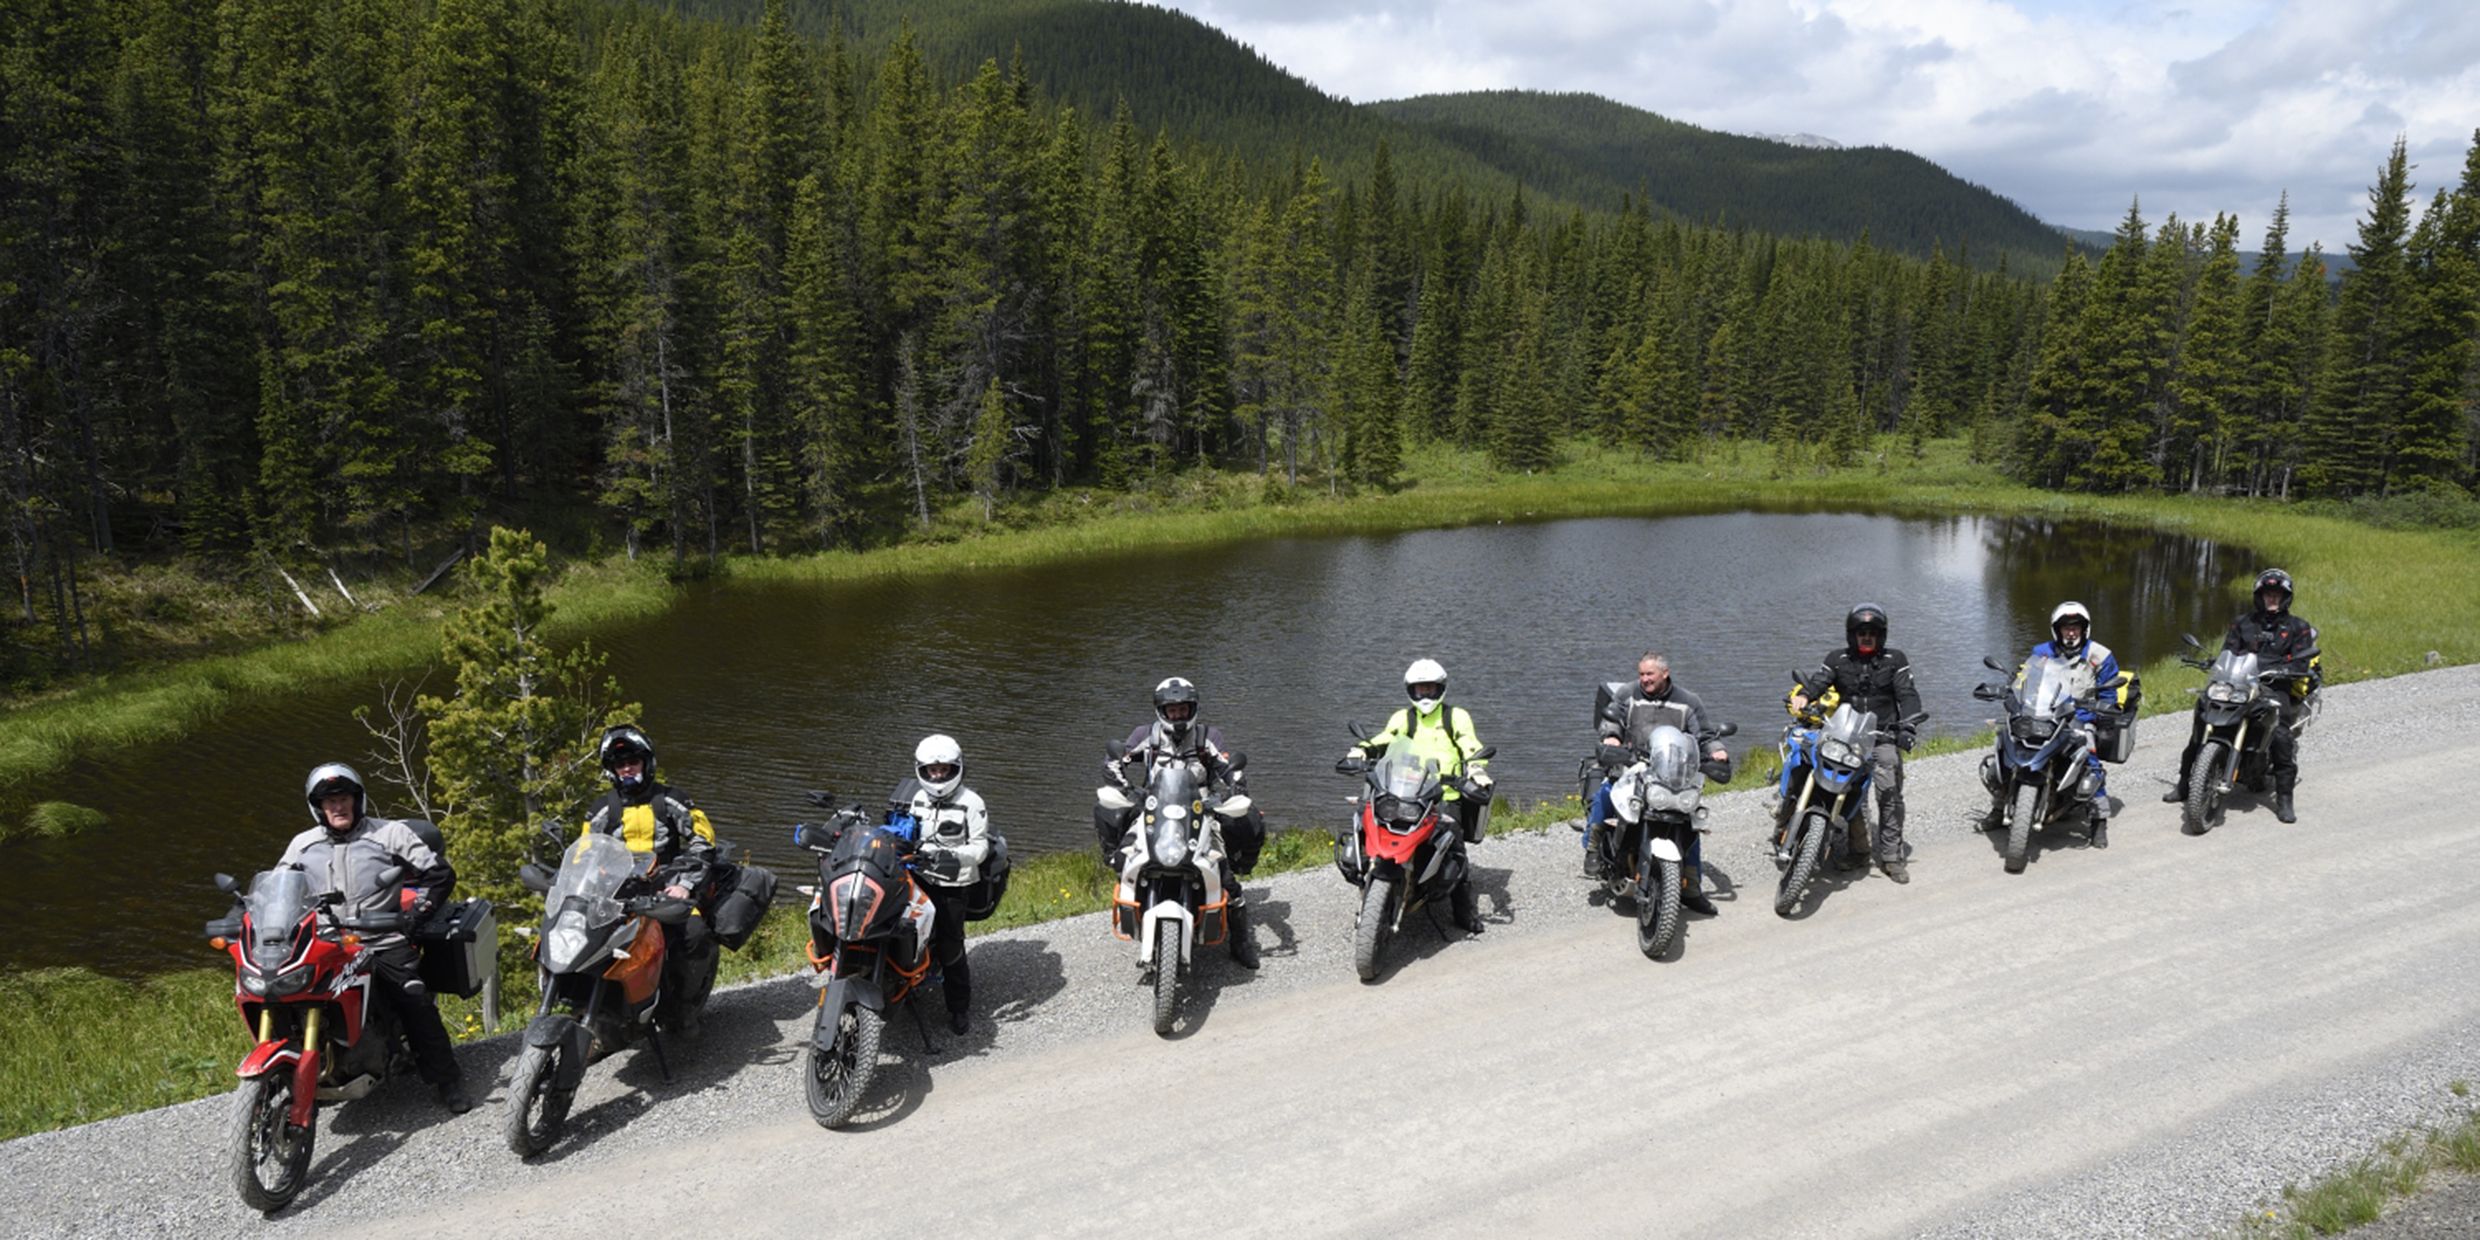 On the Road: Addicted to adventure riding